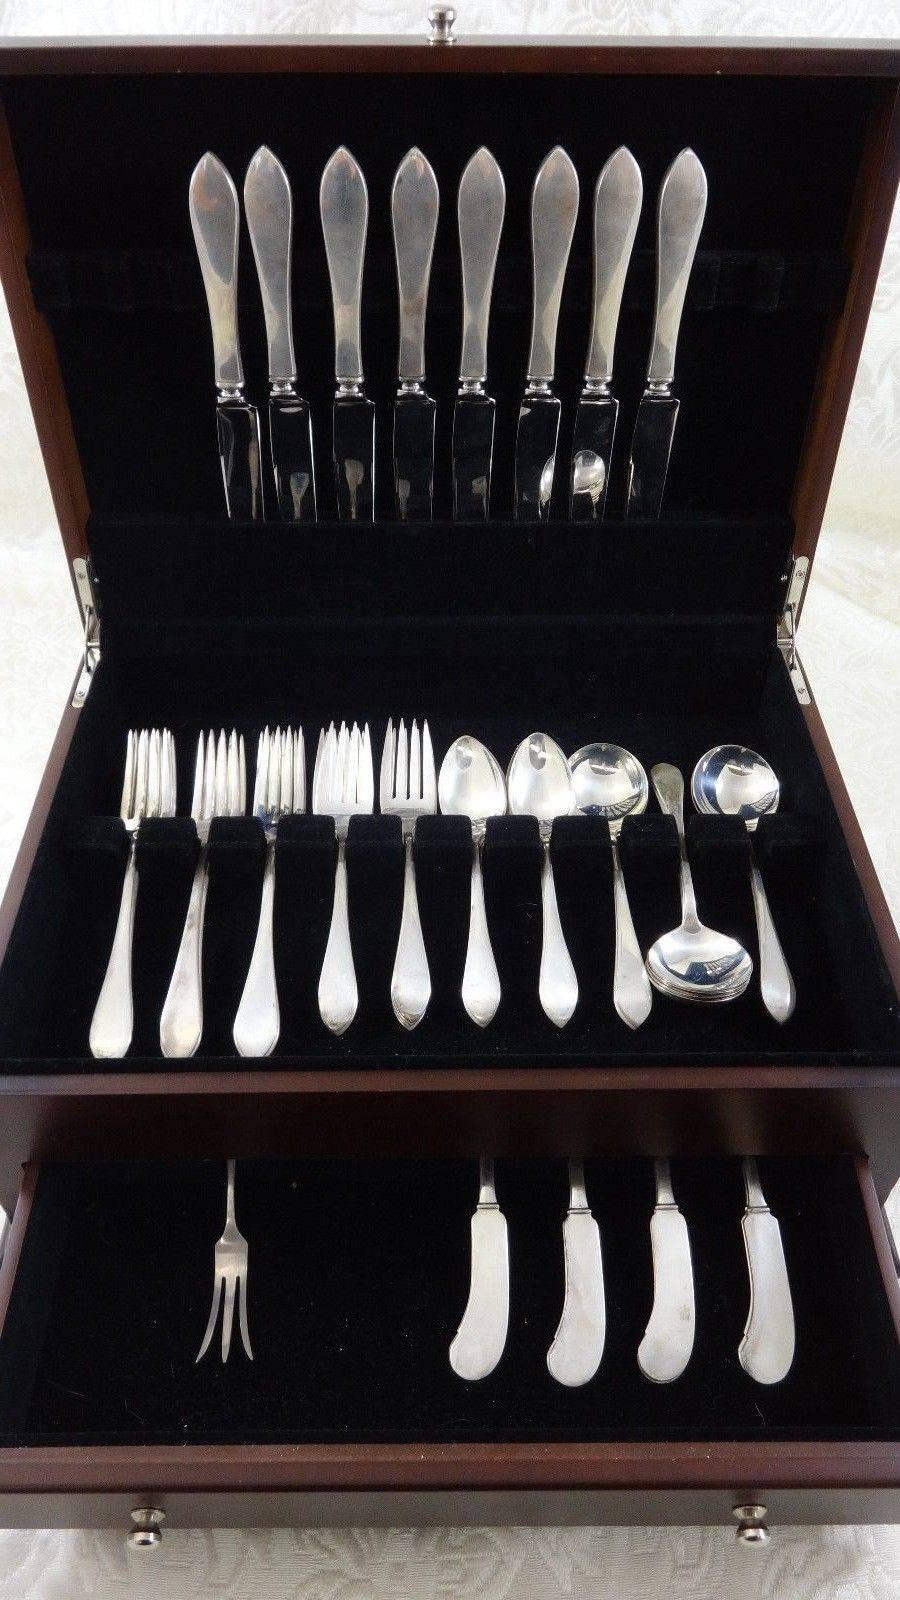 Old Colony by Watson circa 1922 sterling silver flatware set of 47 pieces. This set includes:

Eight knives, 9